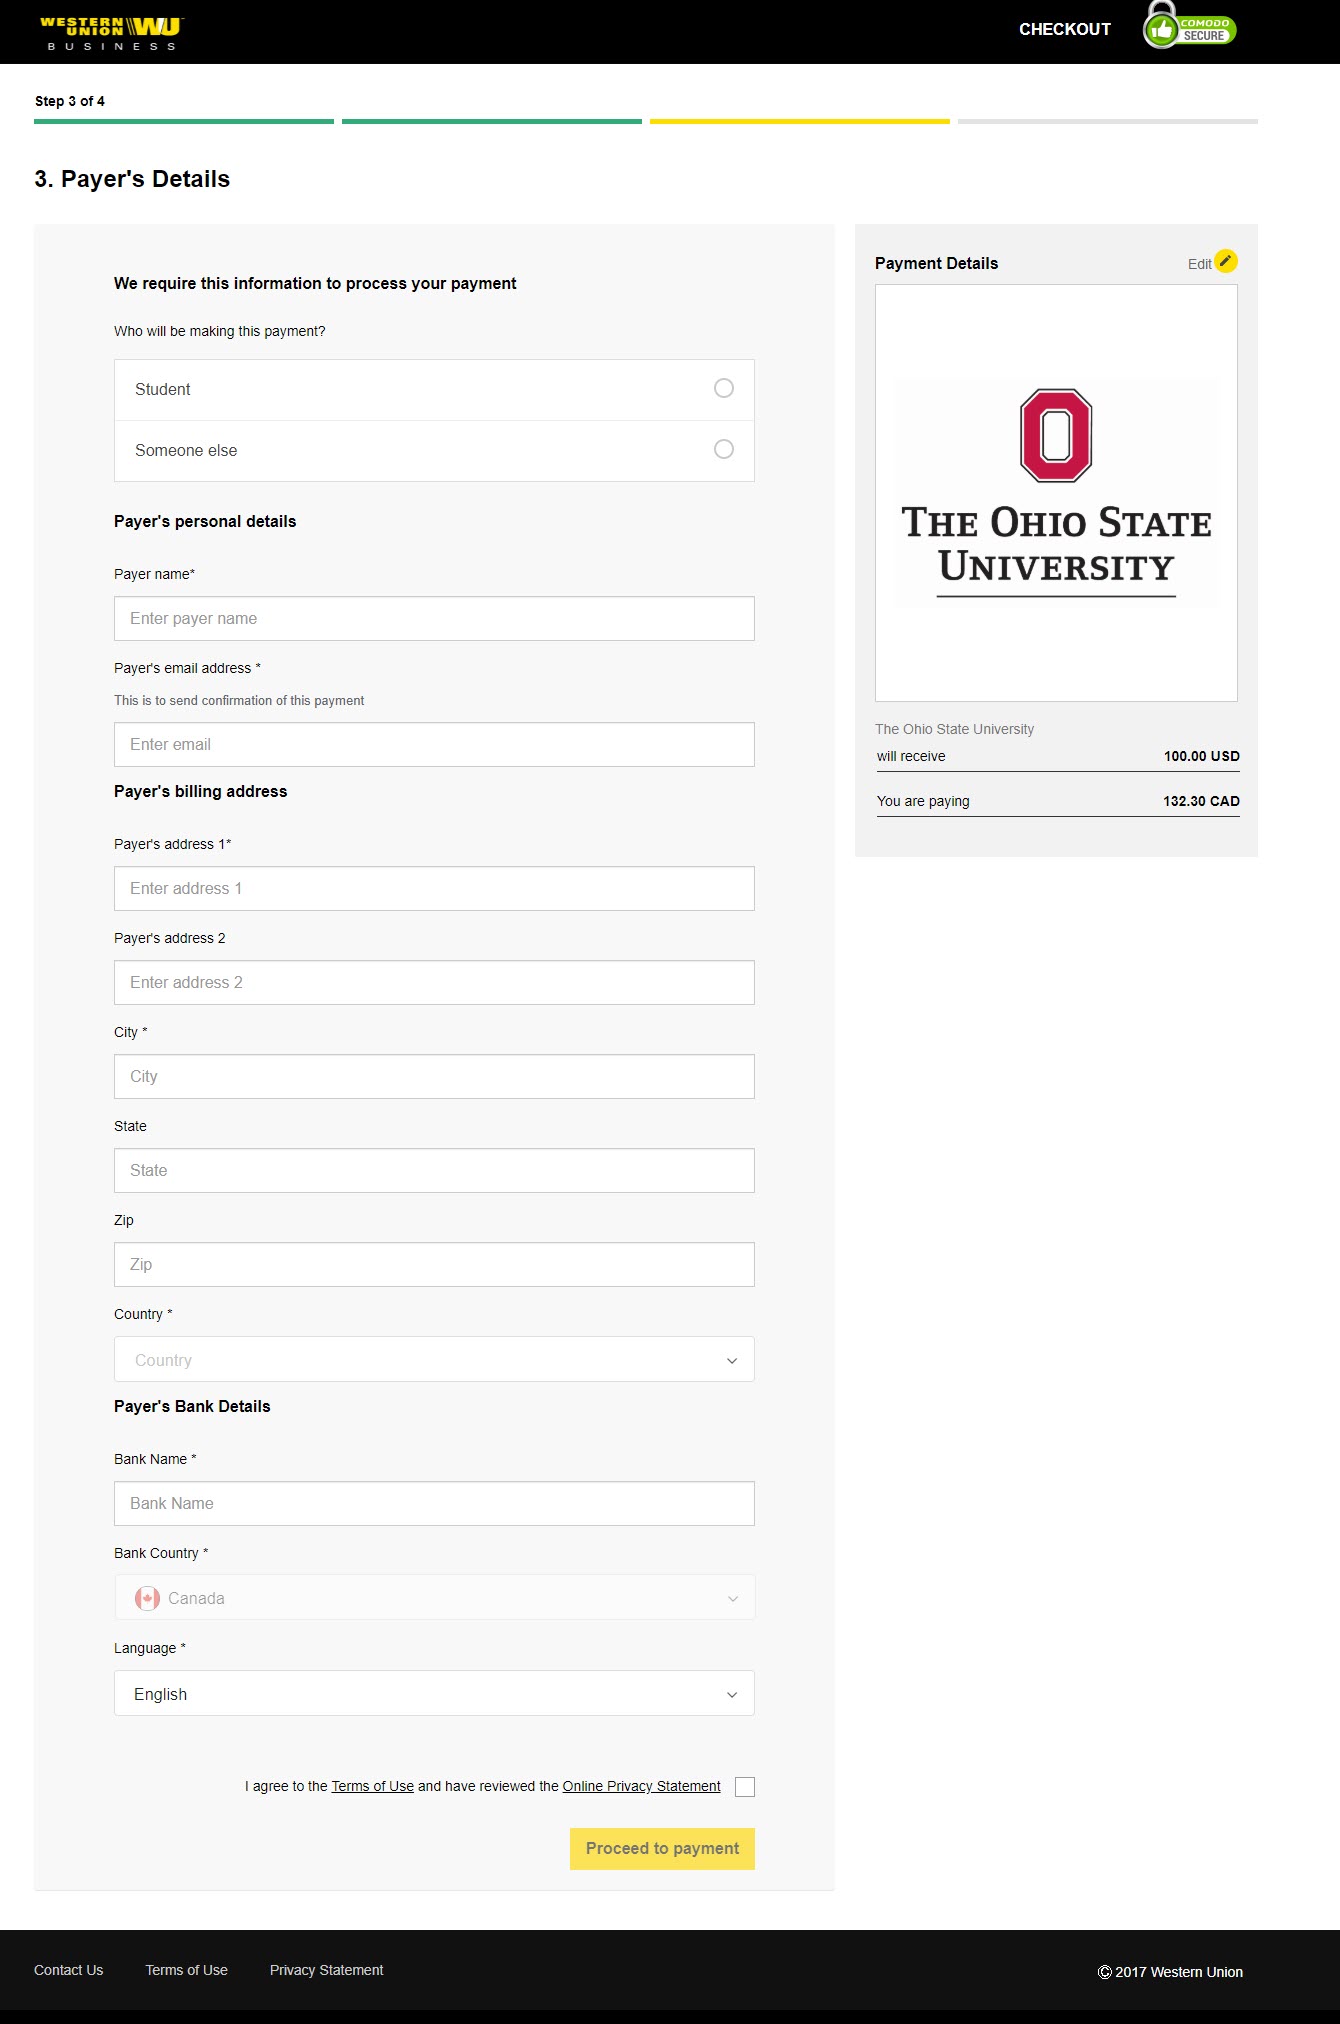 The Ohio State University Western Union payment portal, Step 2 of 4 of the Get a quote process - Student Details page. This page is to identify the correct student details. Fields include: Student ID, Student First Name, Student last name, Street Address, City, State/Province, Zip/Postal Code and E-mail Address. The Next button appears at the bottom of the page. 